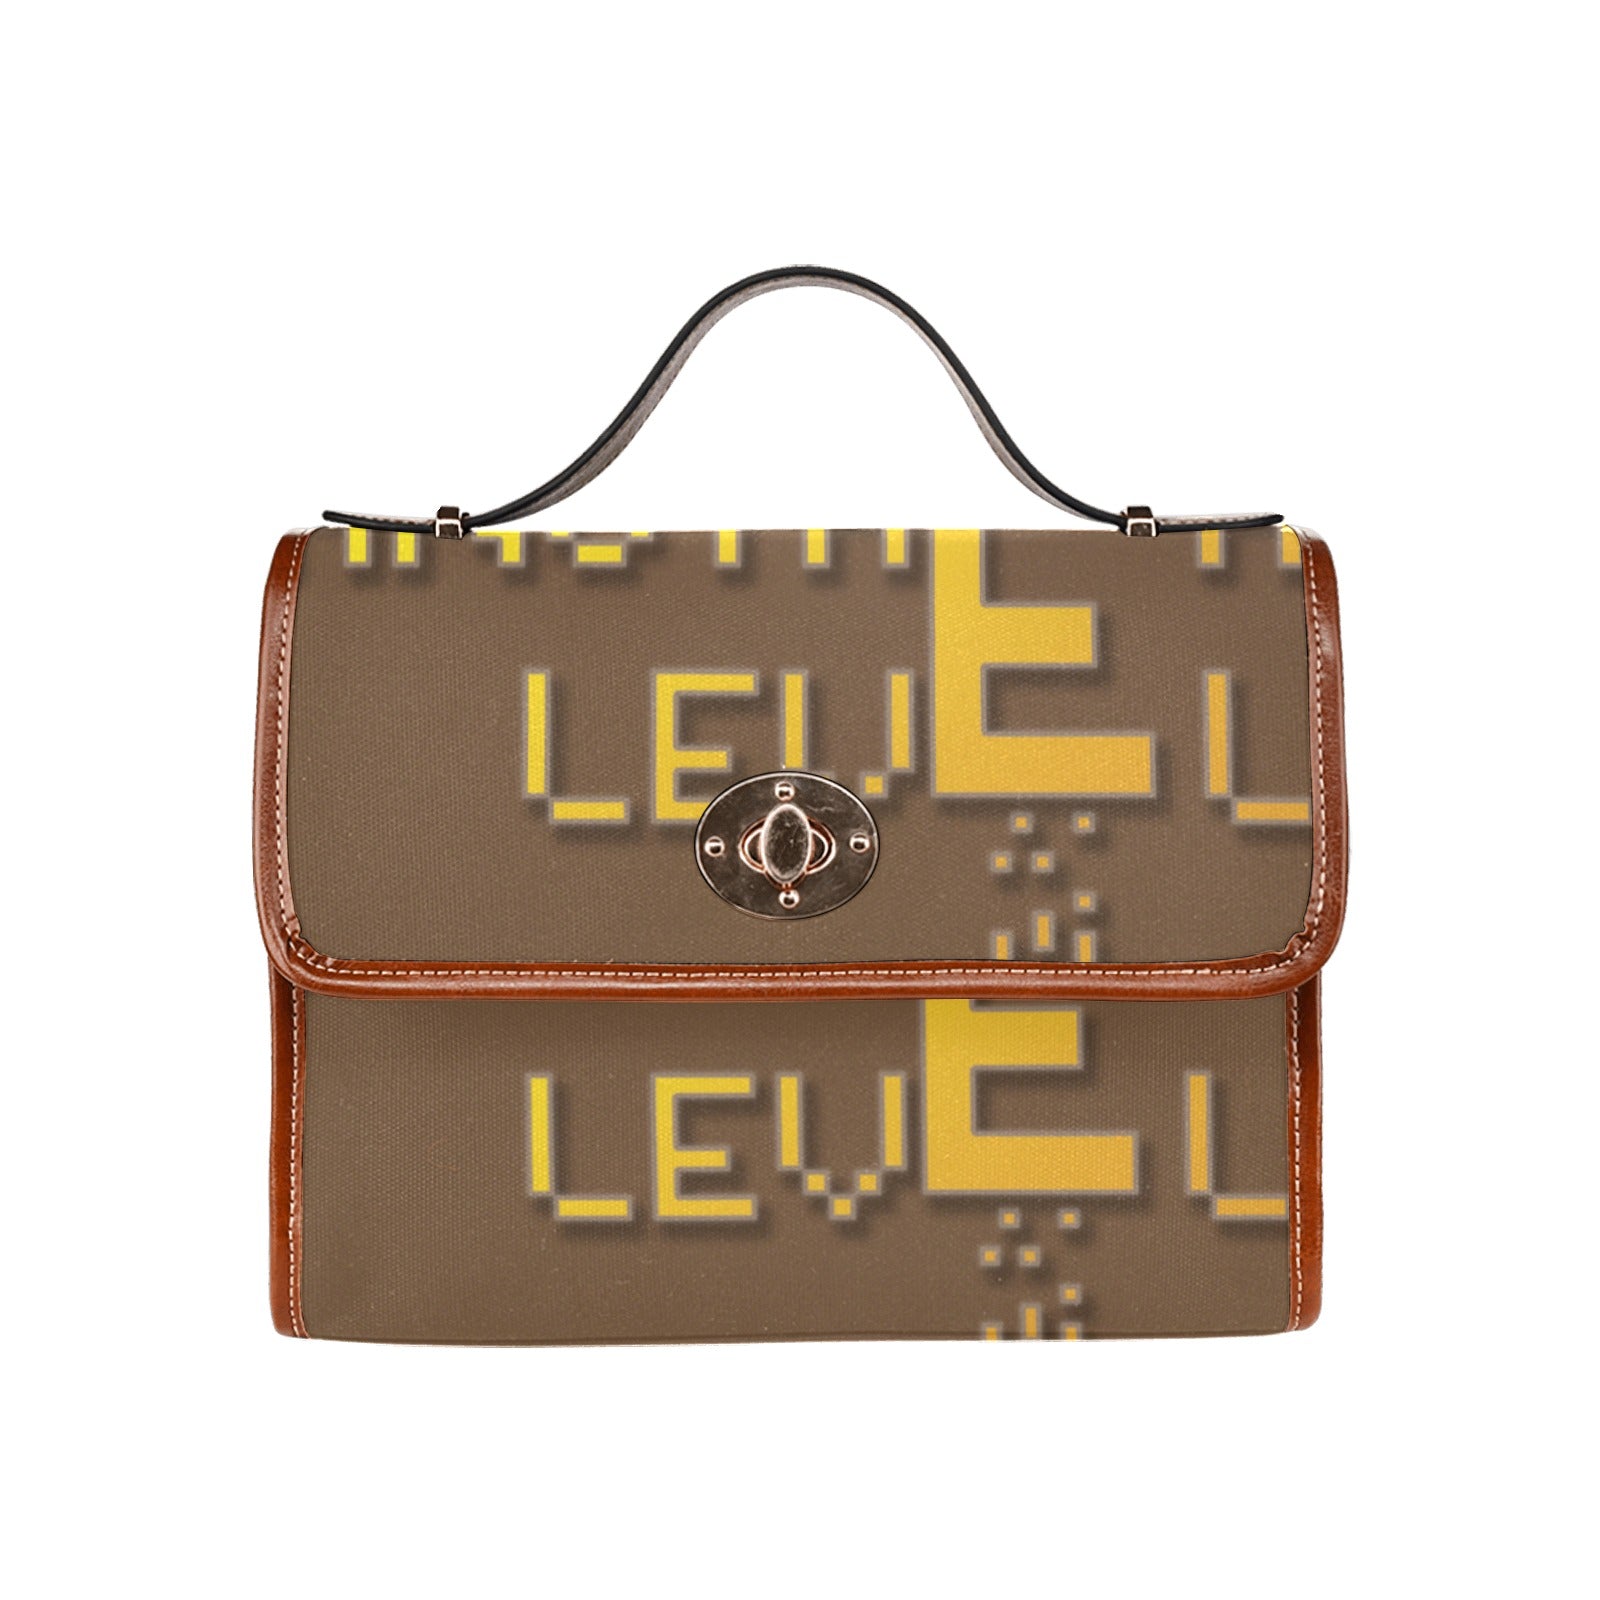 fz yellow levels handbag one size / fz - levels bag-brown all over print waterproof canvas bag(model1641)(brown strap)